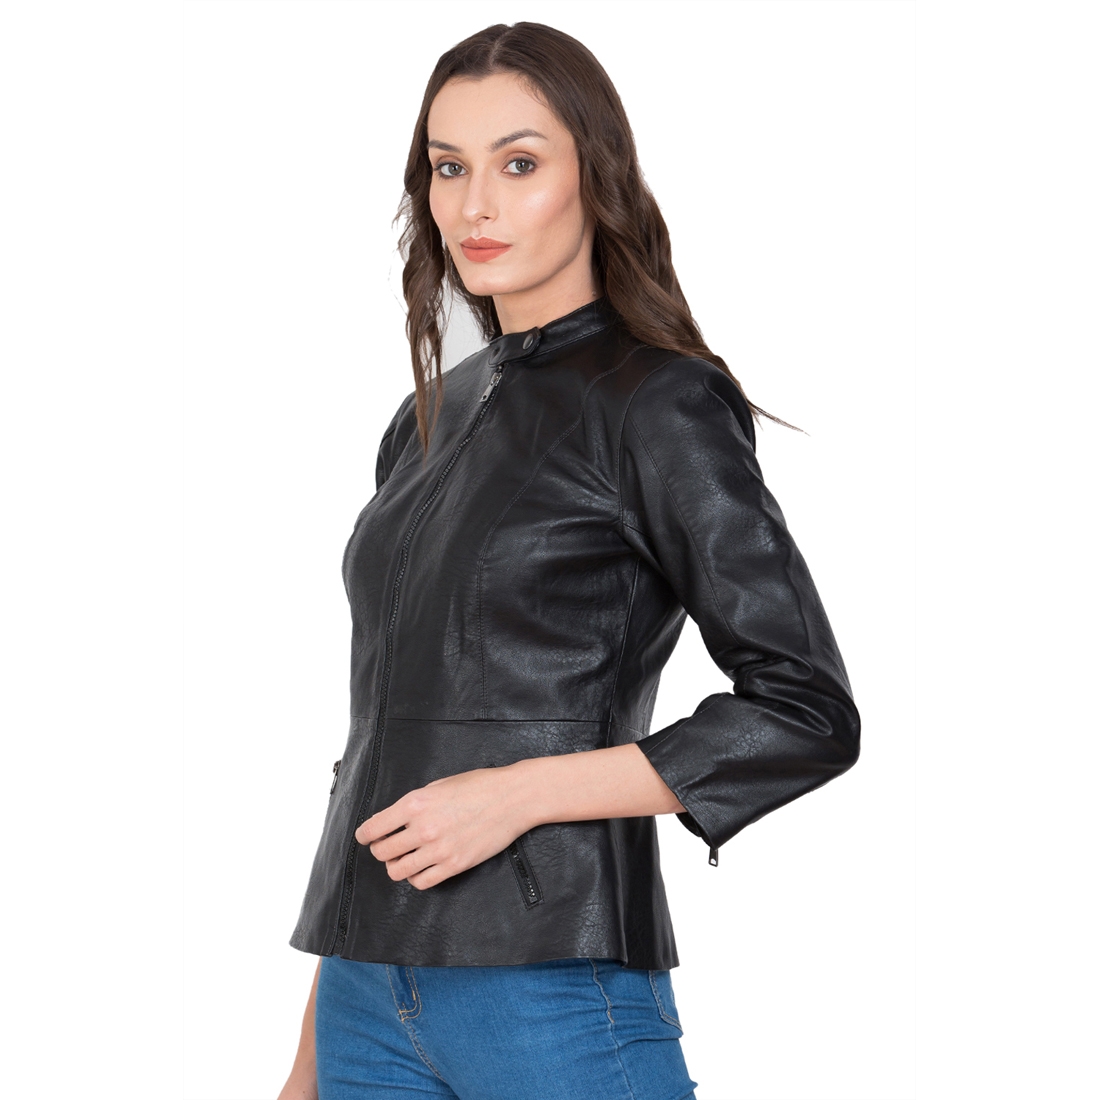 Justanned | JUSTANNED RAVEN WOMEN LEATHER JACKET 2